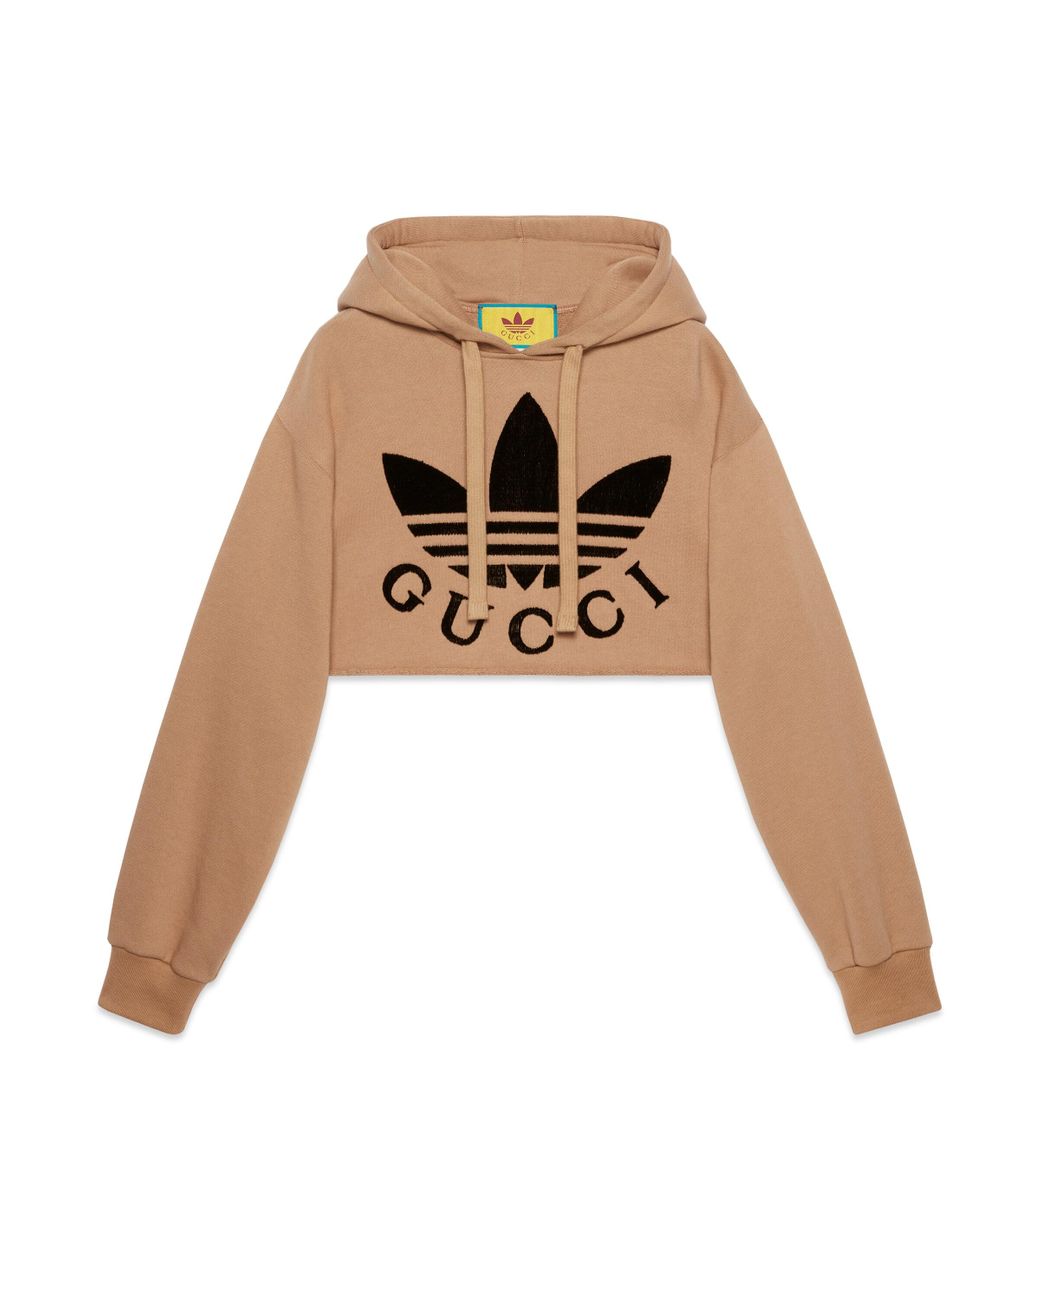 Gucci Adidas X Cropped Sweatshirt in Natural | Lyst